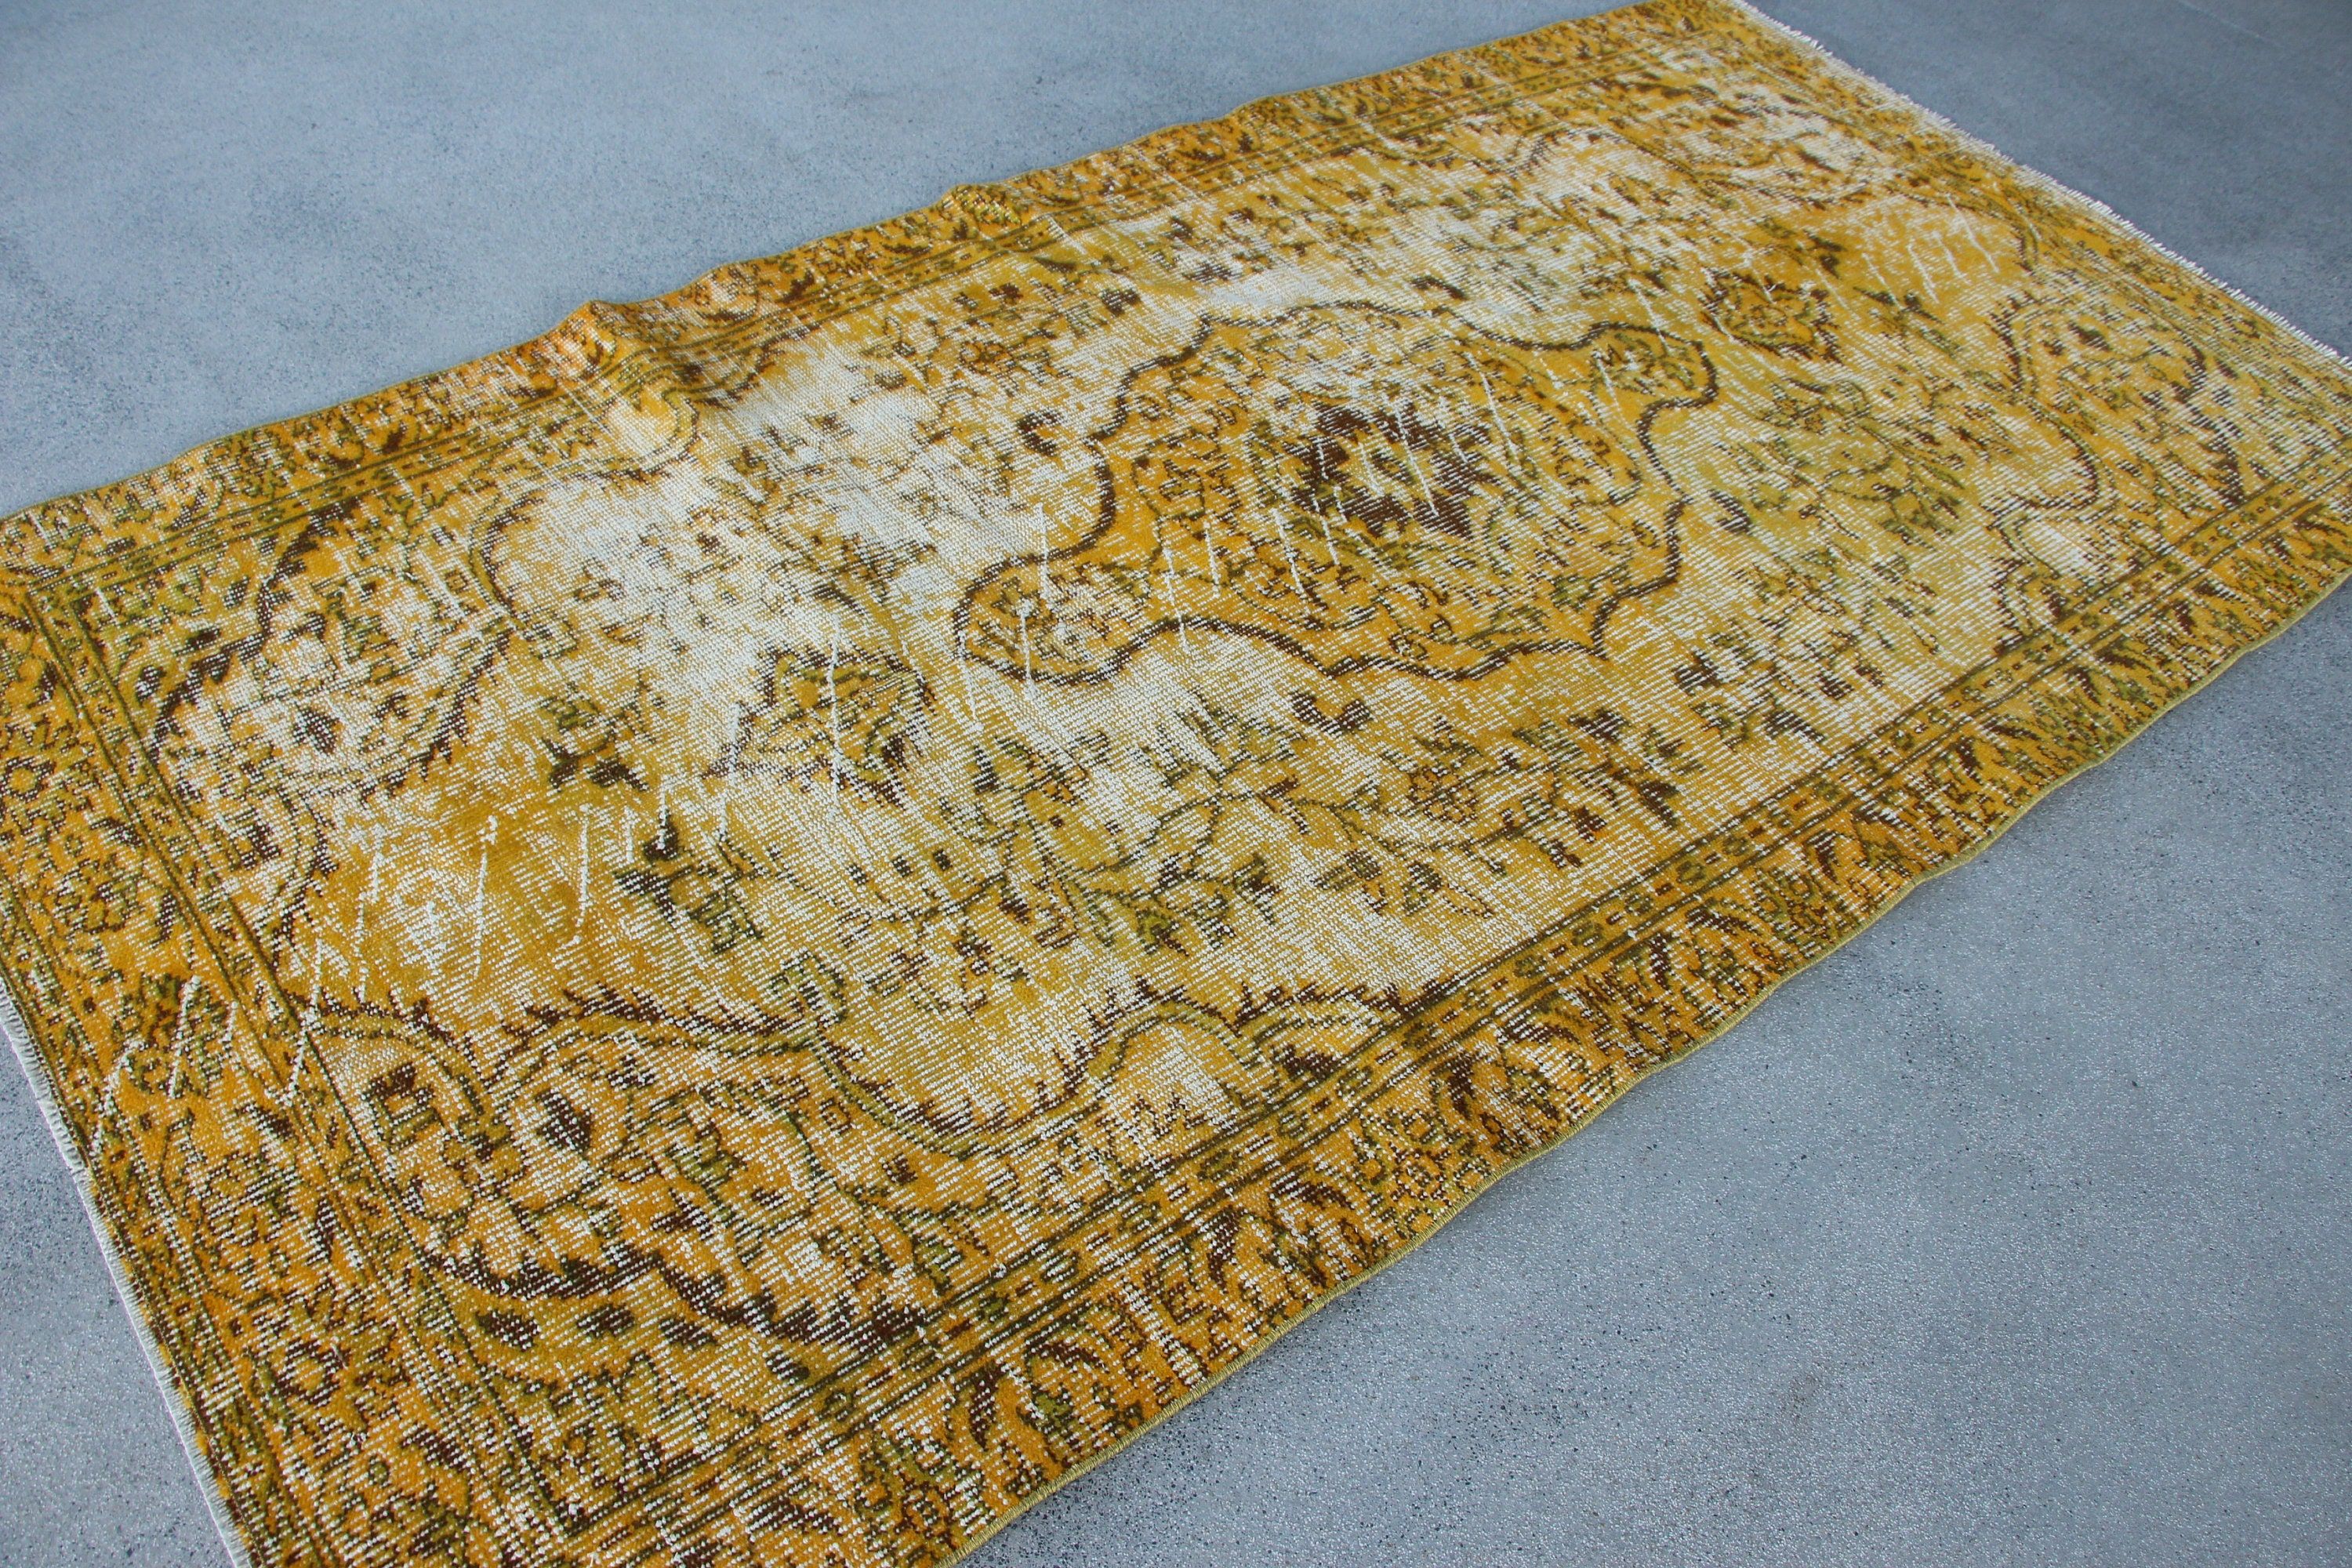 Turkish Rug, Bedroom Rugs, Rugs for Dining Room, Salon Rugs, Vintage Rug, Kitchen Rug, 4.7x8.8 ft Large Rugs, Yellow Anatolian Rugs